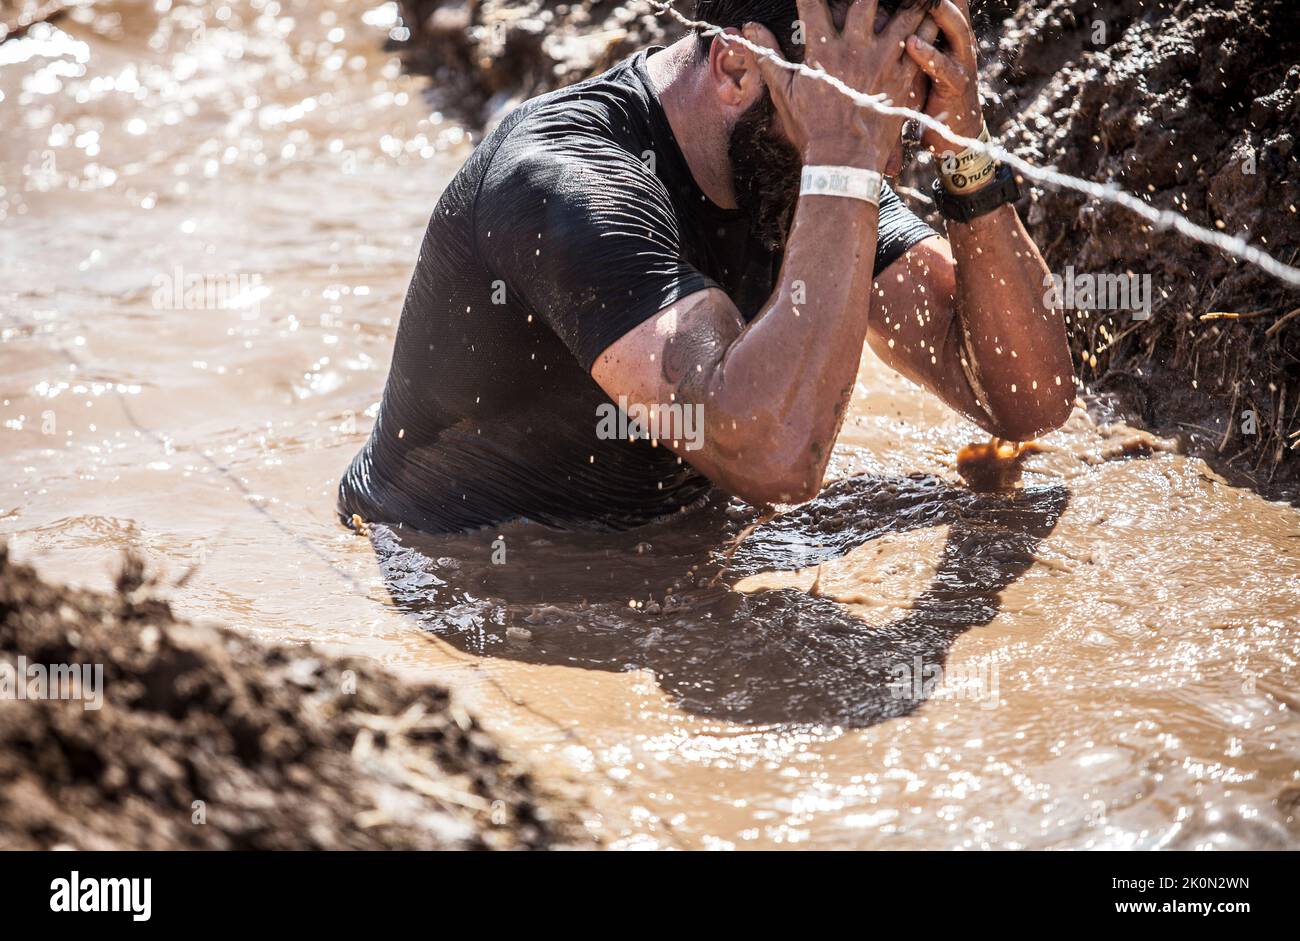 Merida, Spain - Sept 11th, 2022: FarinatoRace Merida 2022. Toughest obstacle course in the world. Trench flooded with barbed wire Stock Photo